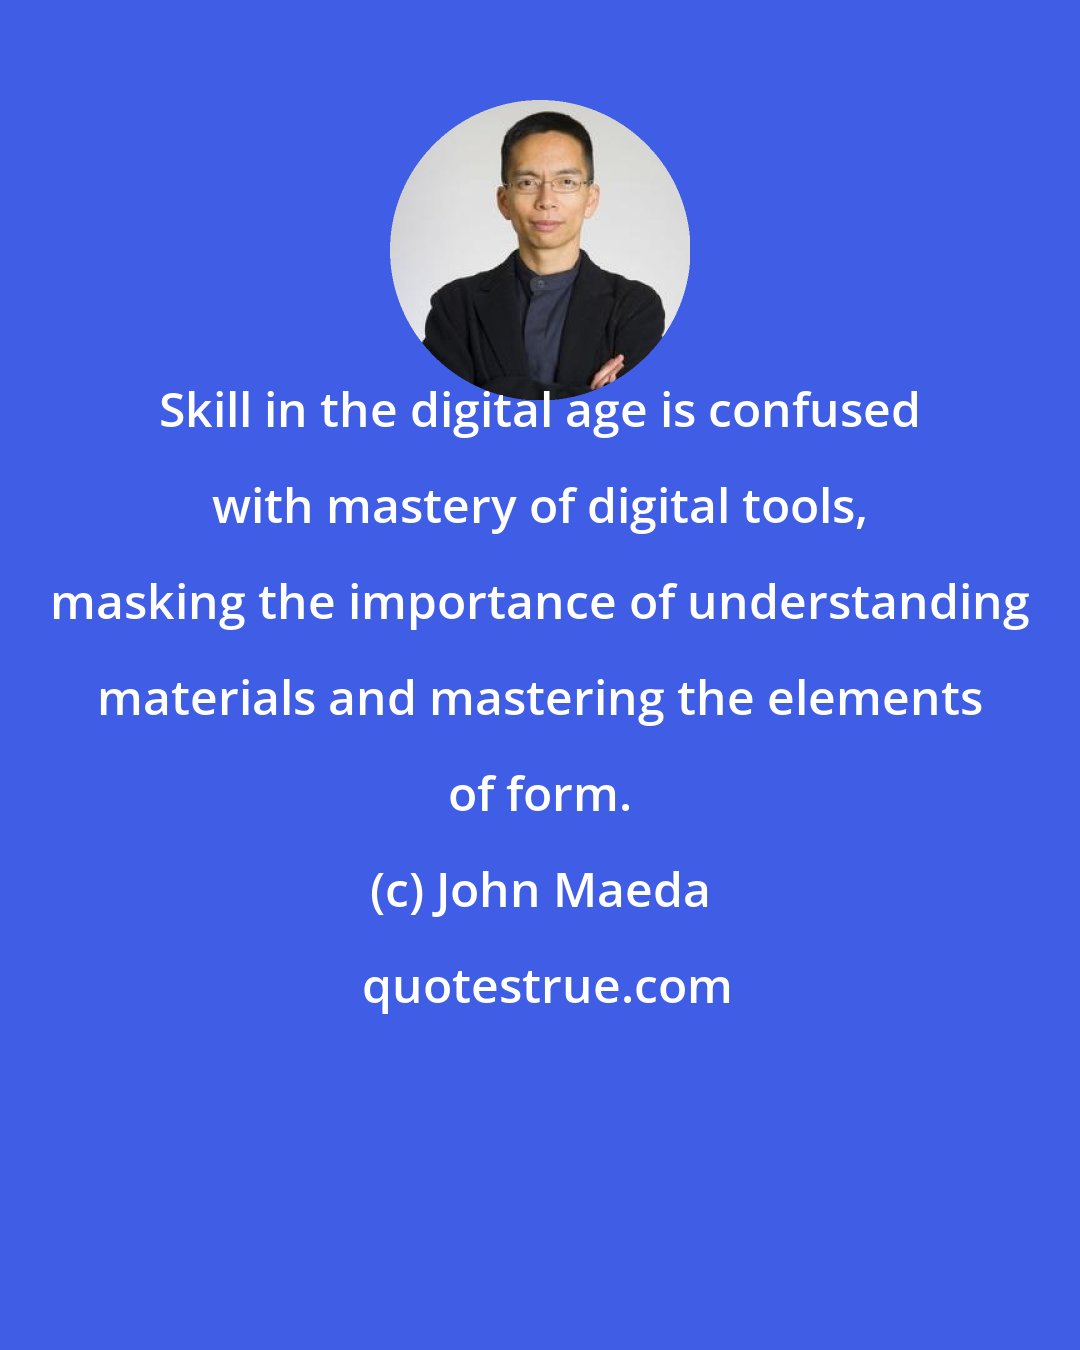 John Maeda: Skill in the digital age is confused with mastery of digital tools, masking the importance of understanding materials and mastering the elements of form.